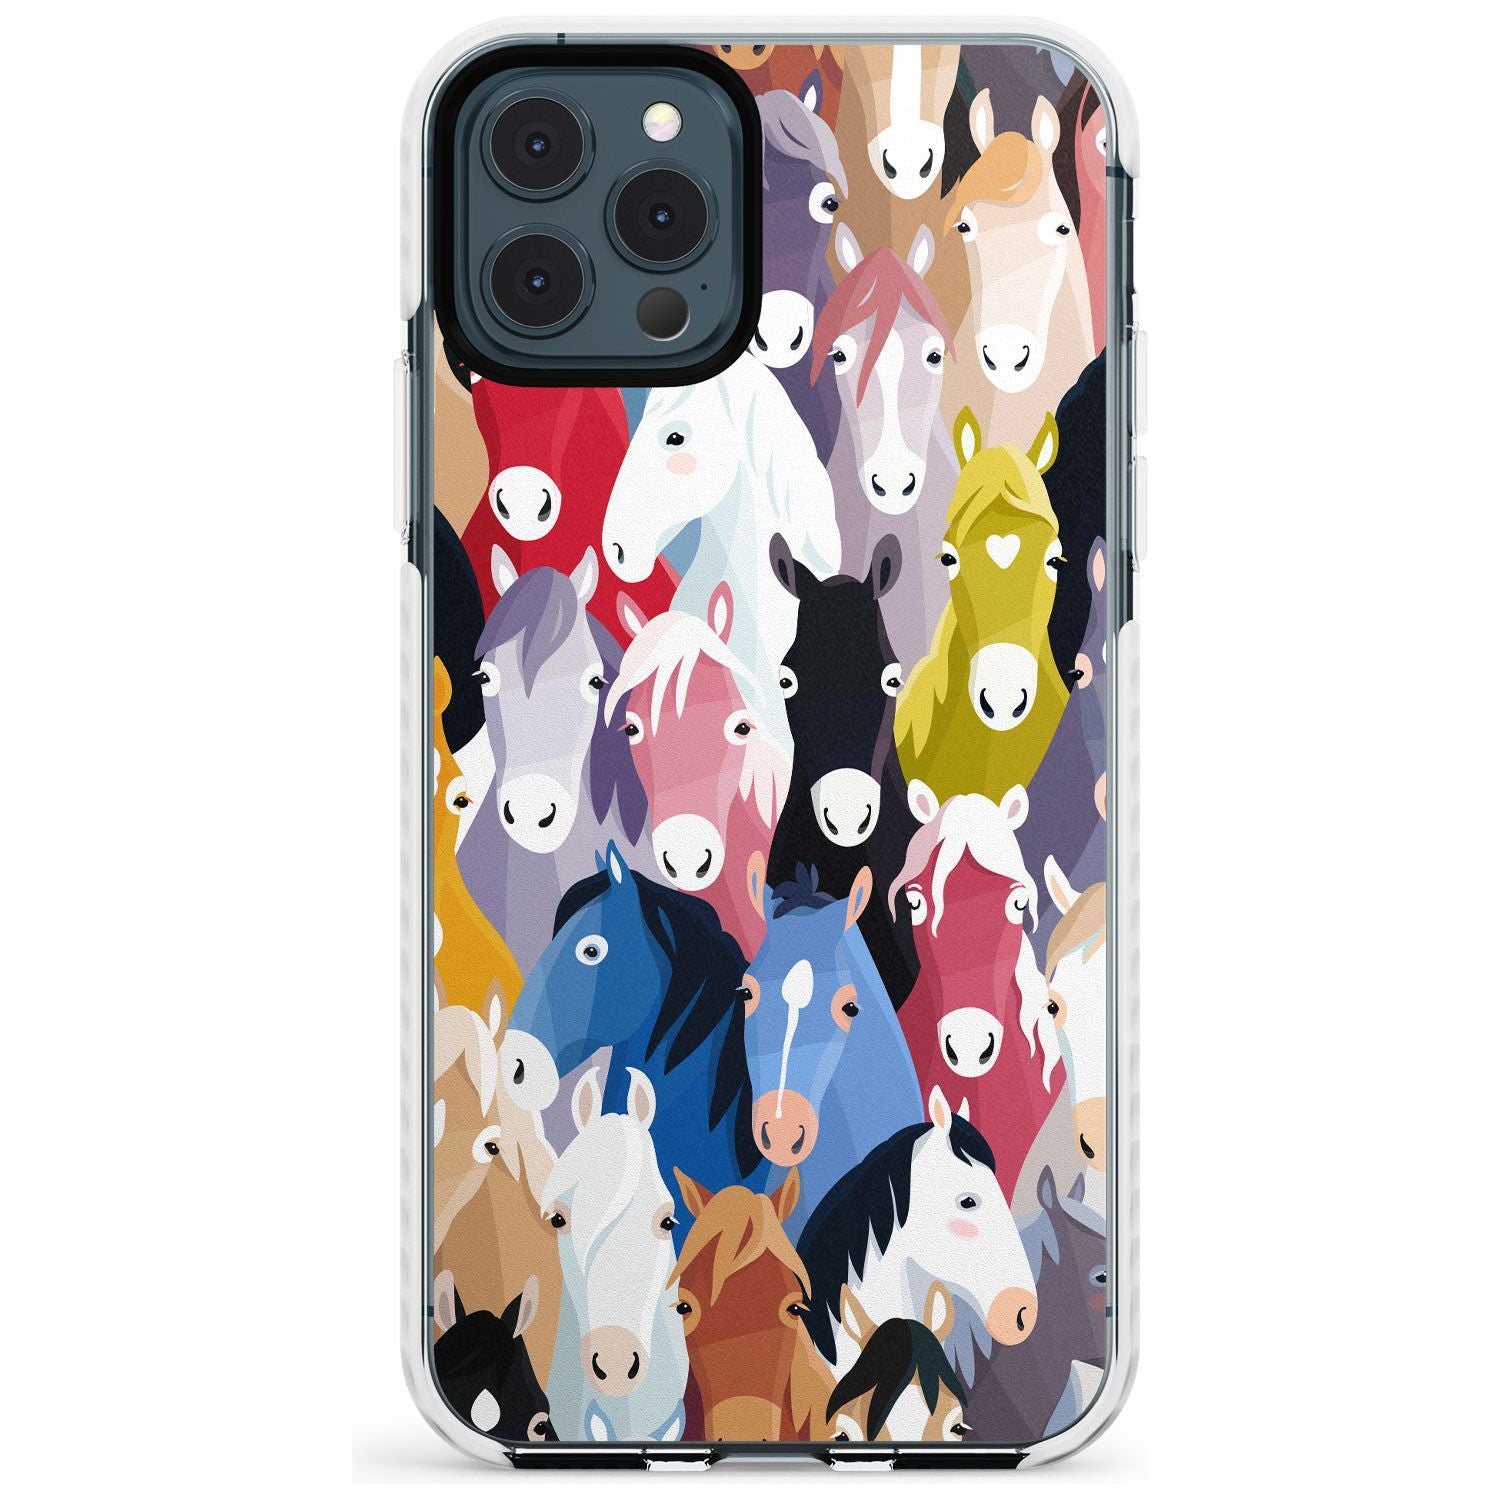 Colourful Horse Pattern Impact Phone Case for iPhone 11 Pro Max